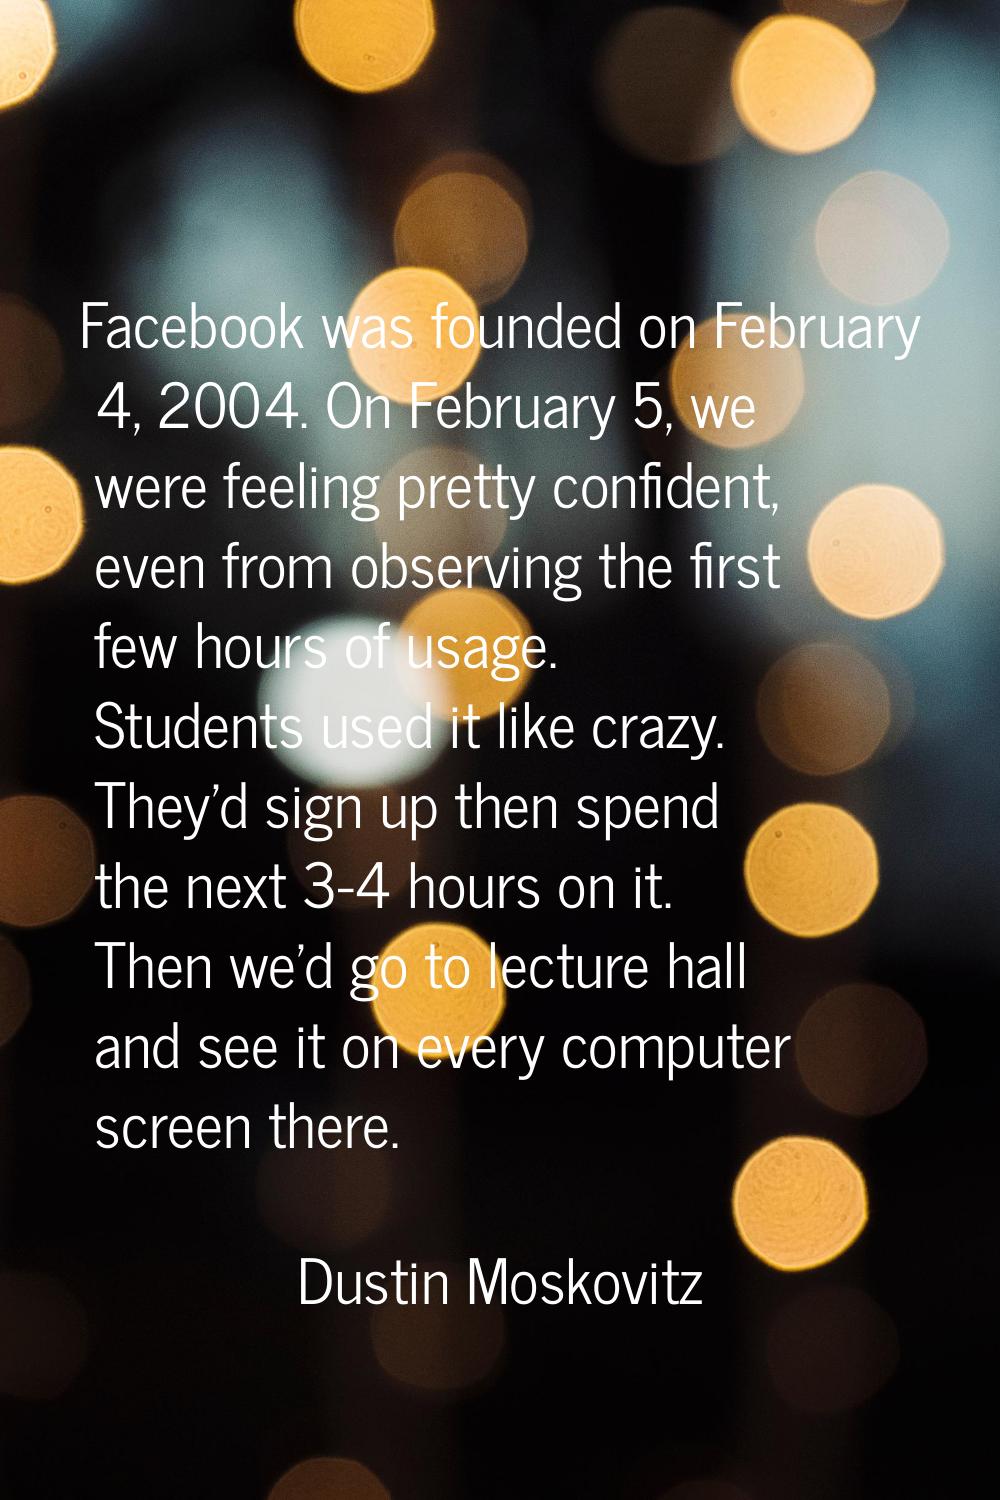 Facebook was founded on February 4, 2004. On February 5, we were feeling pretty confident, even fro